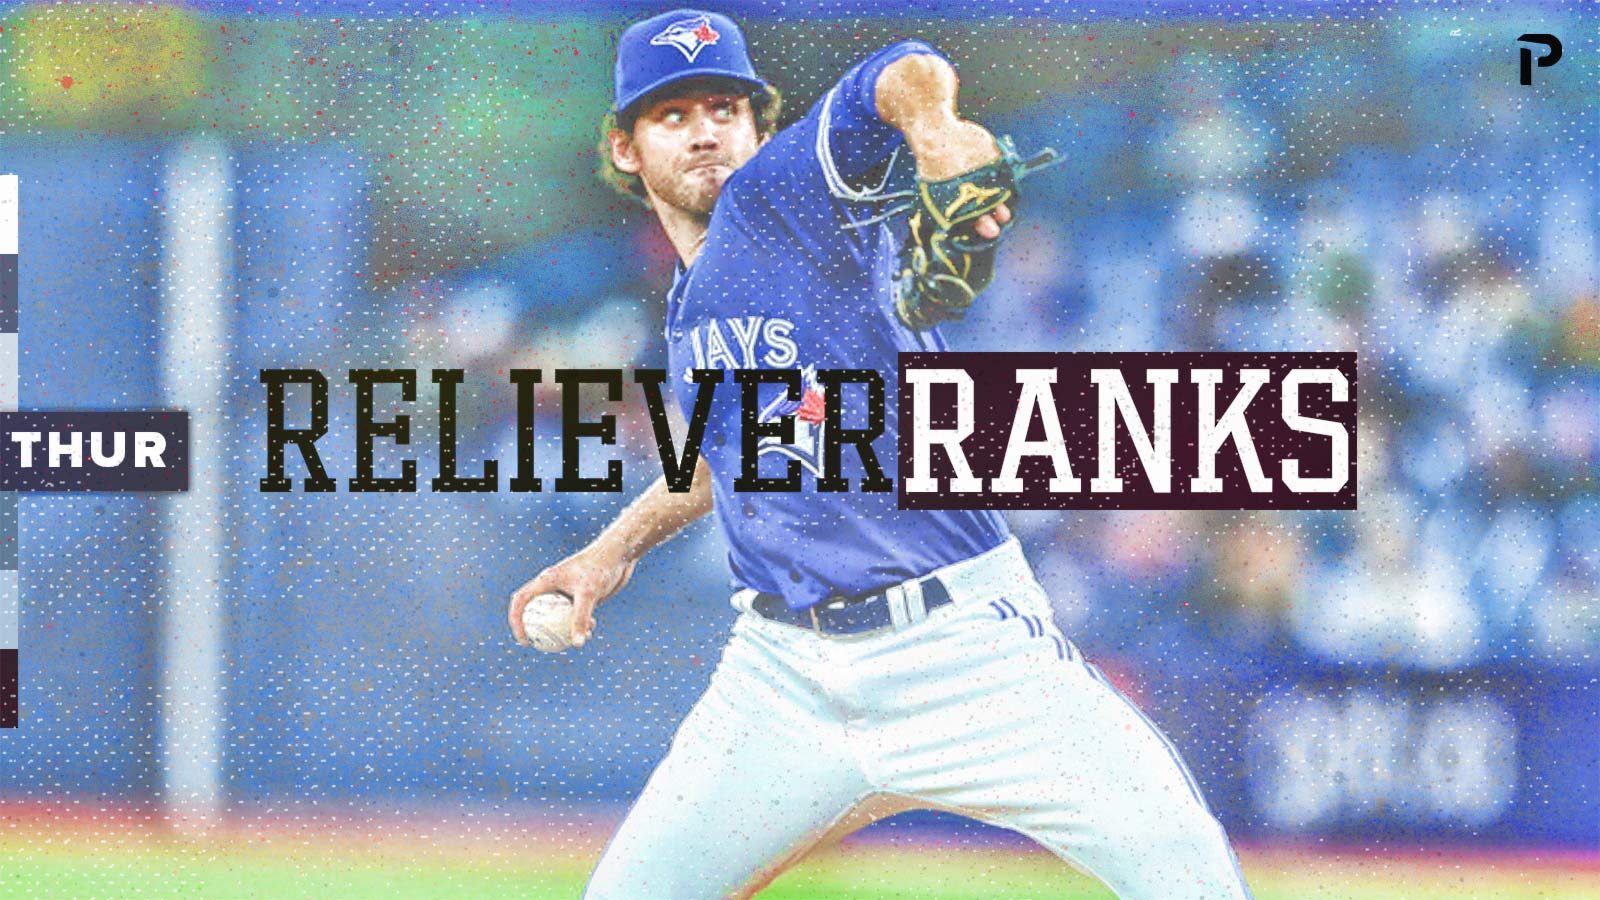 Sarris: Starting pitcher rankings for the final third of the